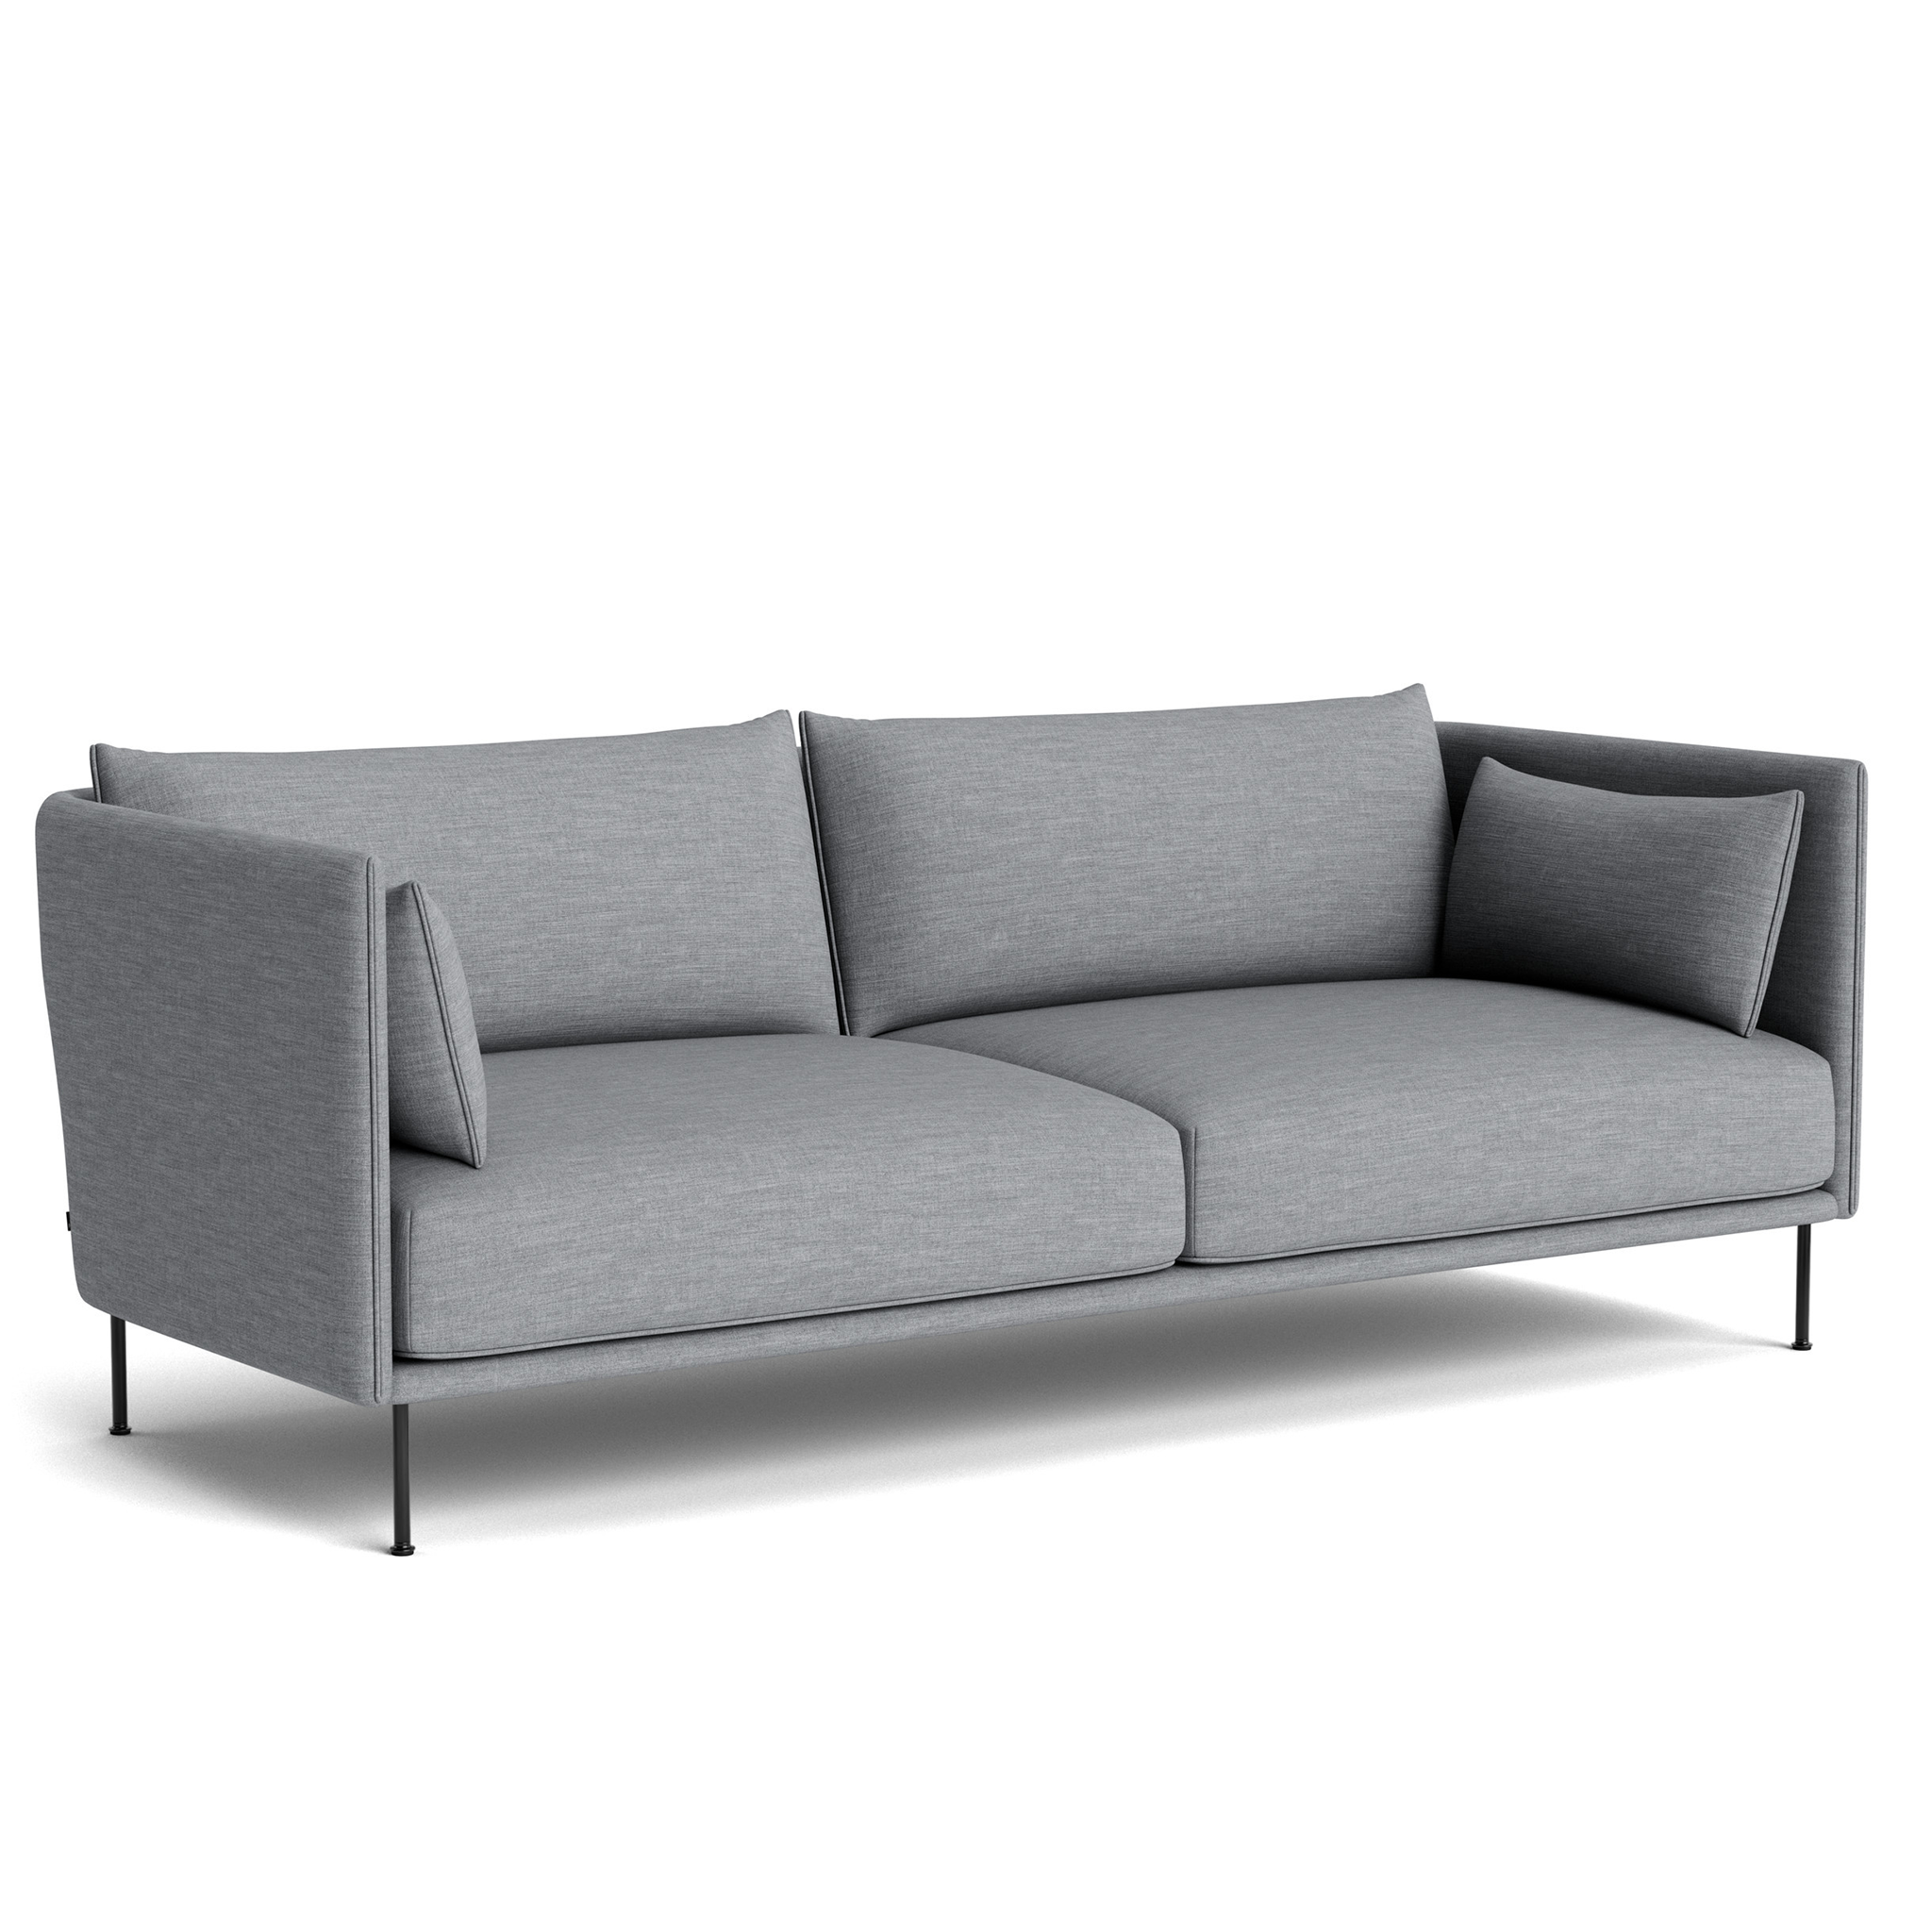 Silhouette Mono Sofa 3 Seater by Hay